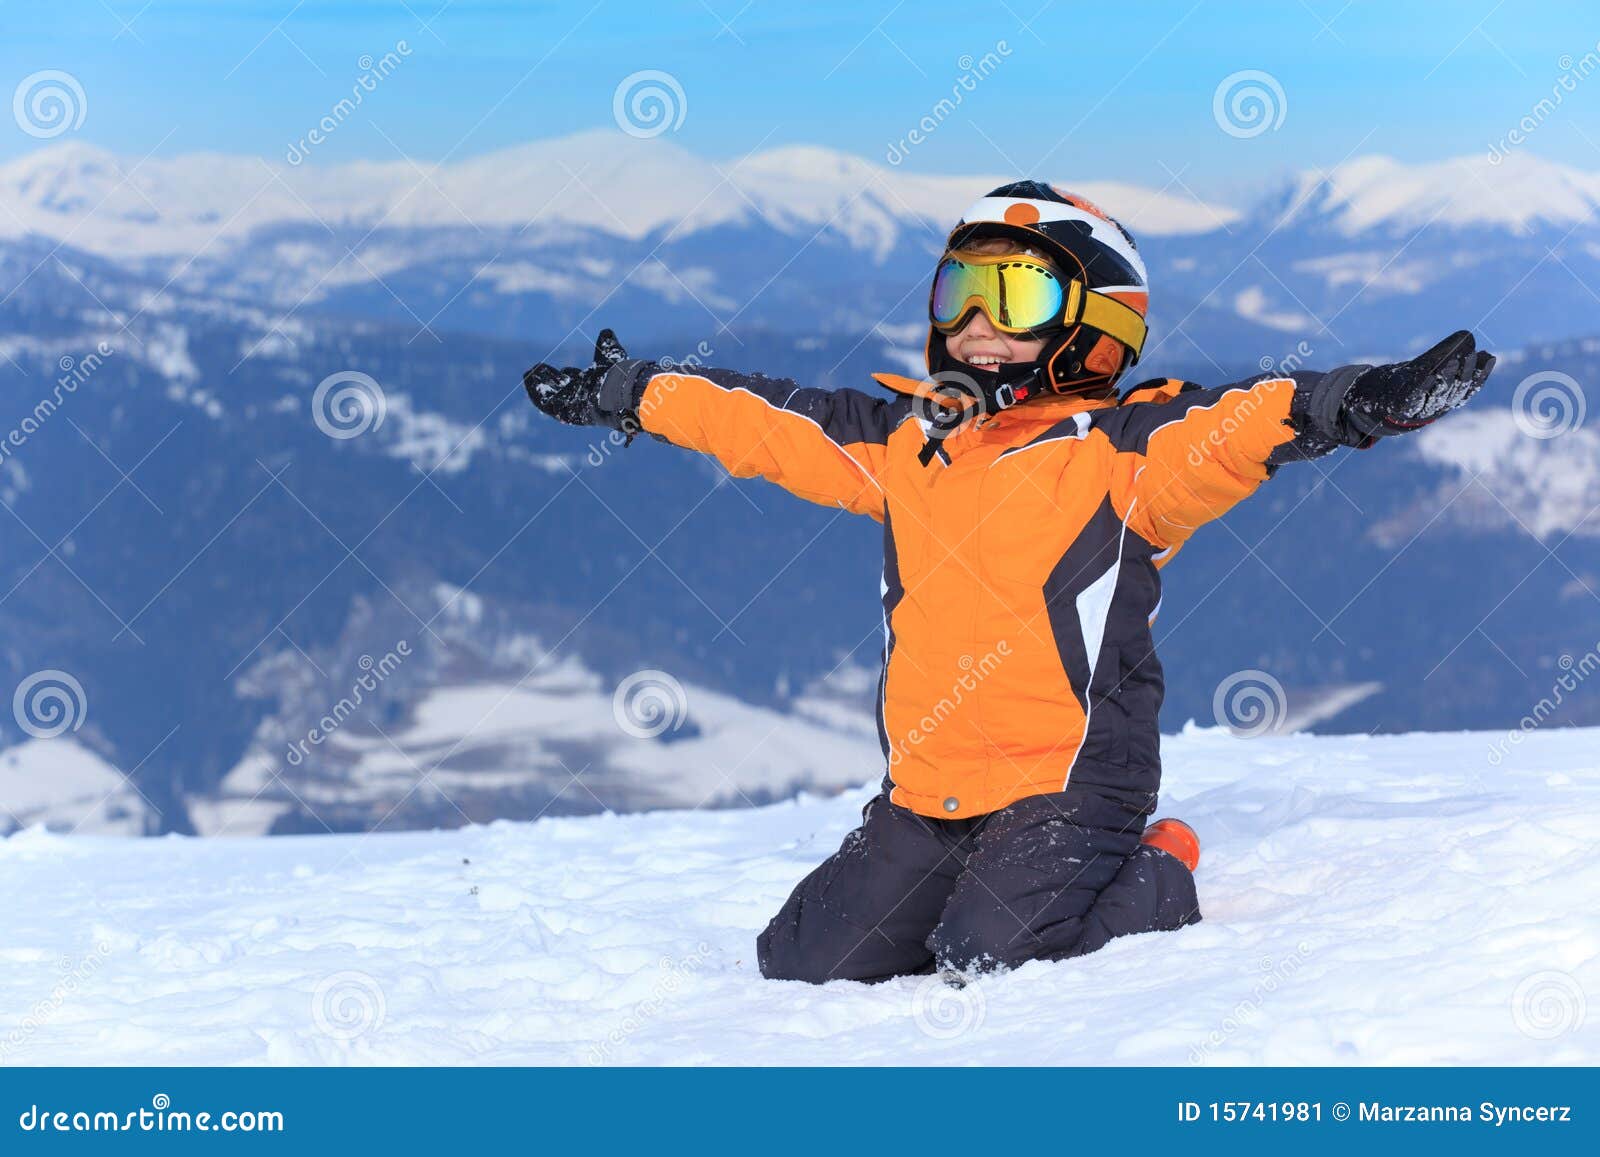 Young Boy Skier stock image. Image of arms, sits, skier - 15741981